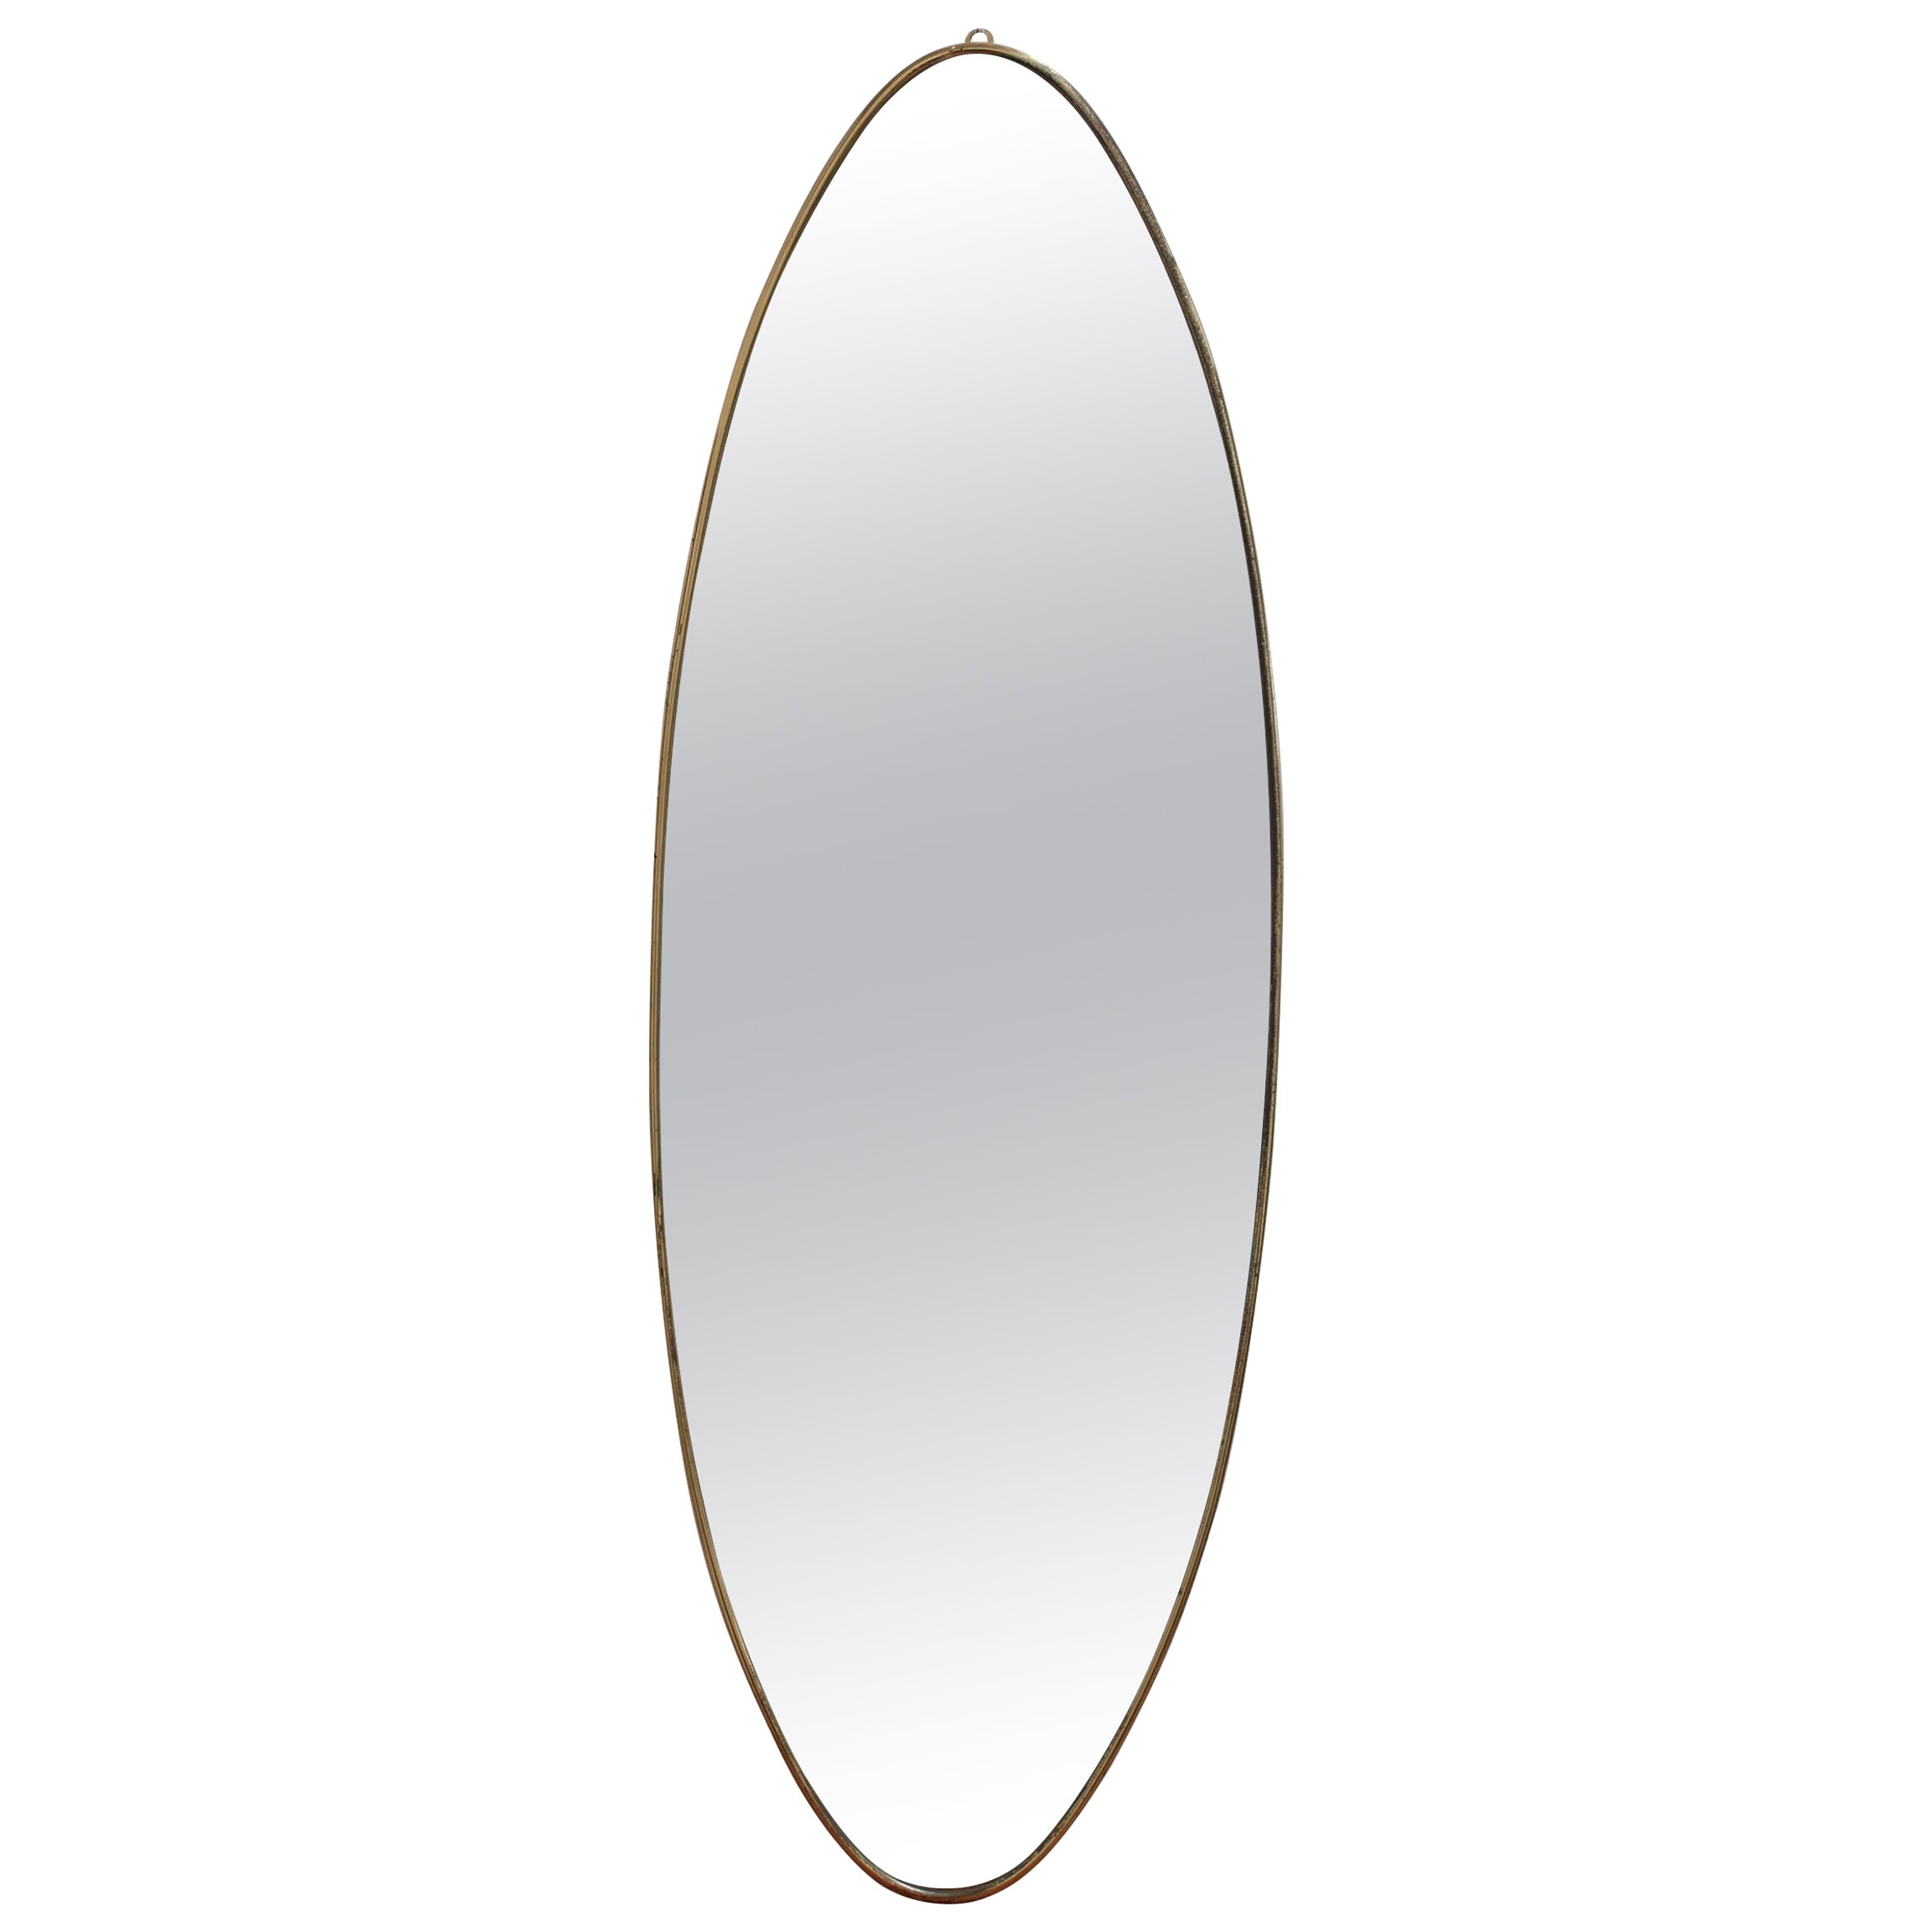 Vintage Italian Wall Mirror with Brass Frame (circa 1960s) - Large For Sale